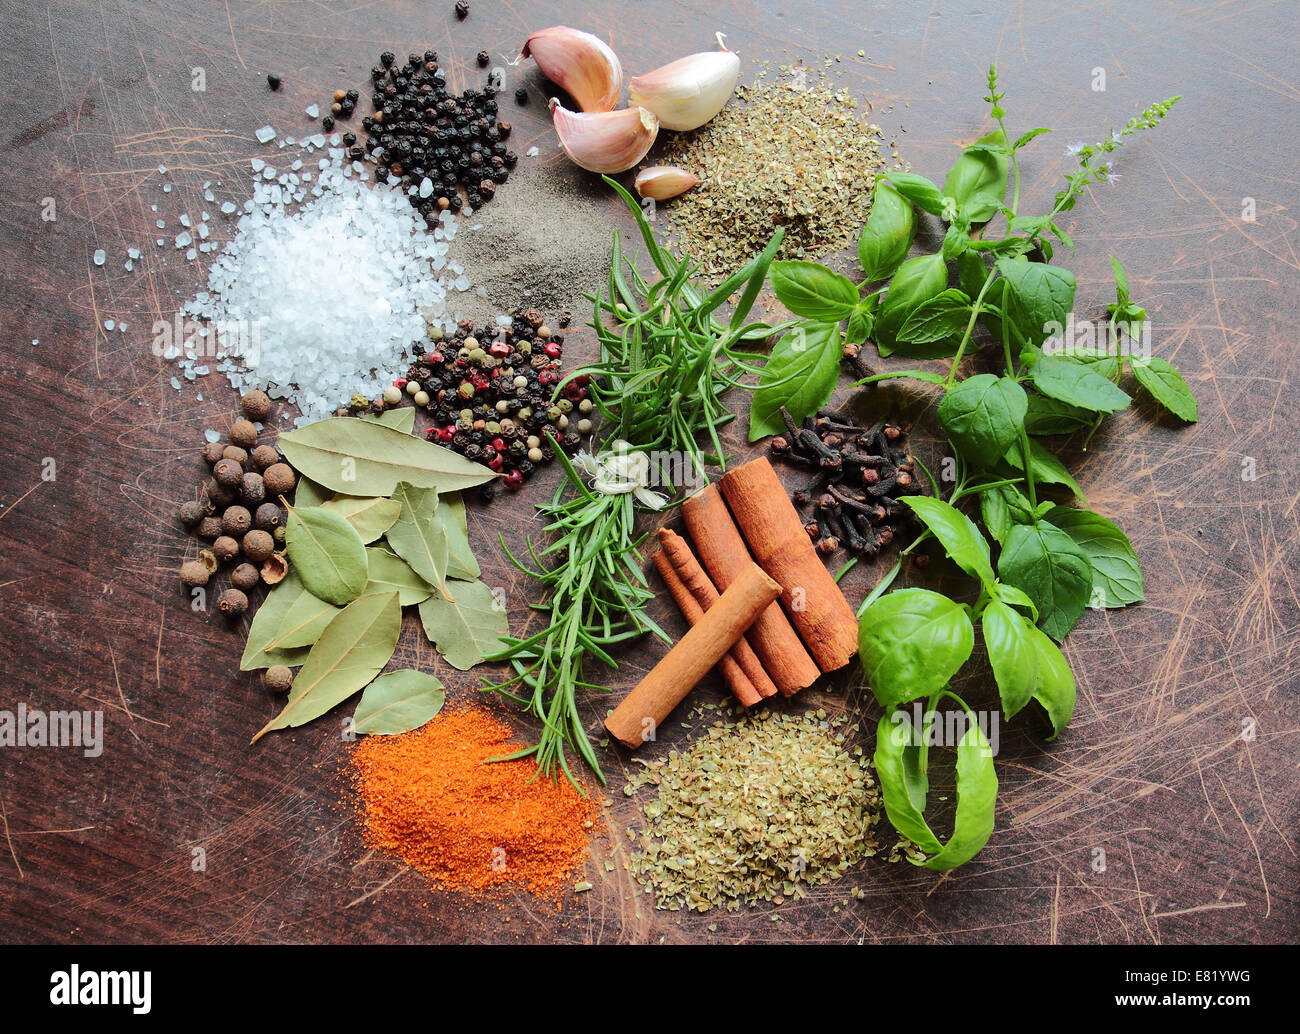 Variety of fresh herbs and aromatic spices. Food and cuisine ingredients. Stock Photo